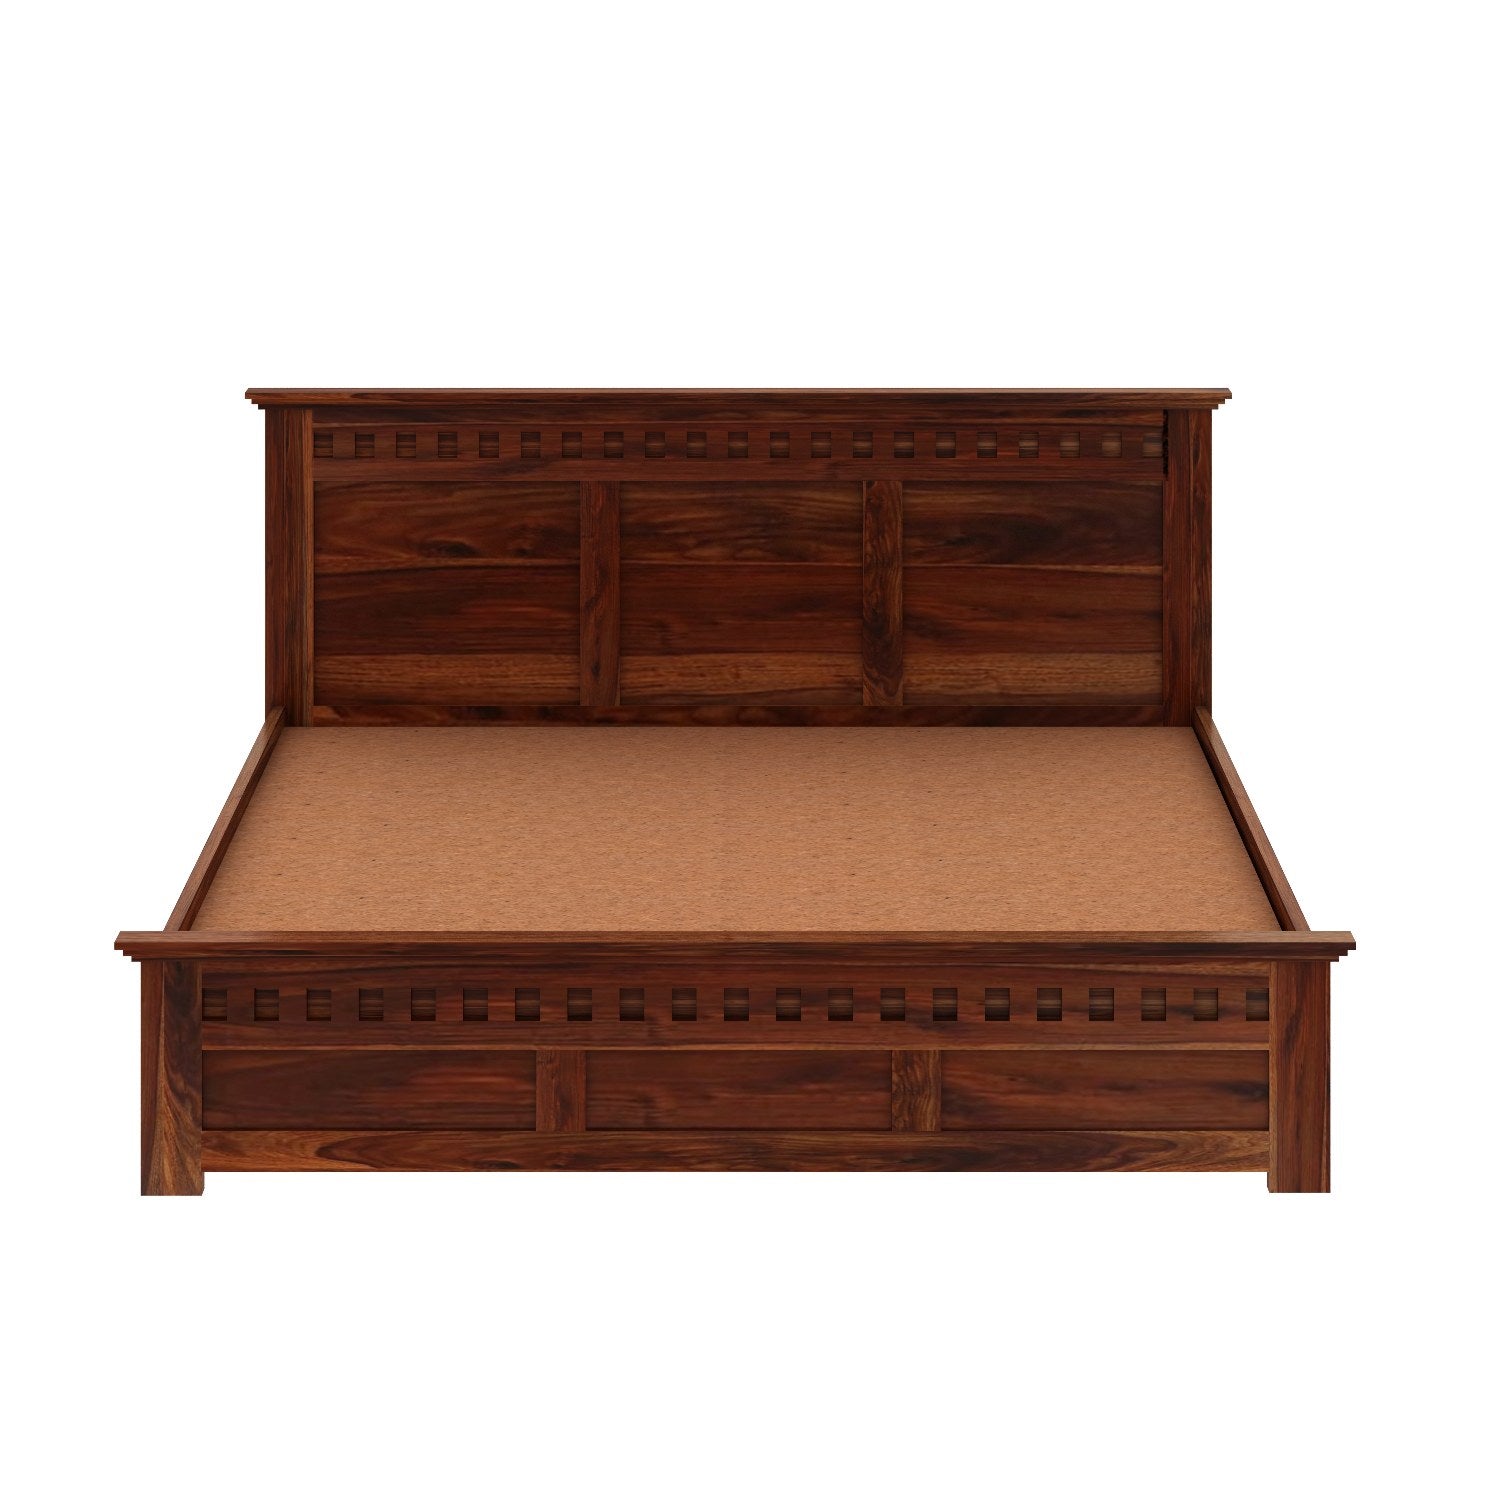 Amer Solid Sheesham Wood Hydraulic Bed With Box Storage (King Size, Natural Finish)